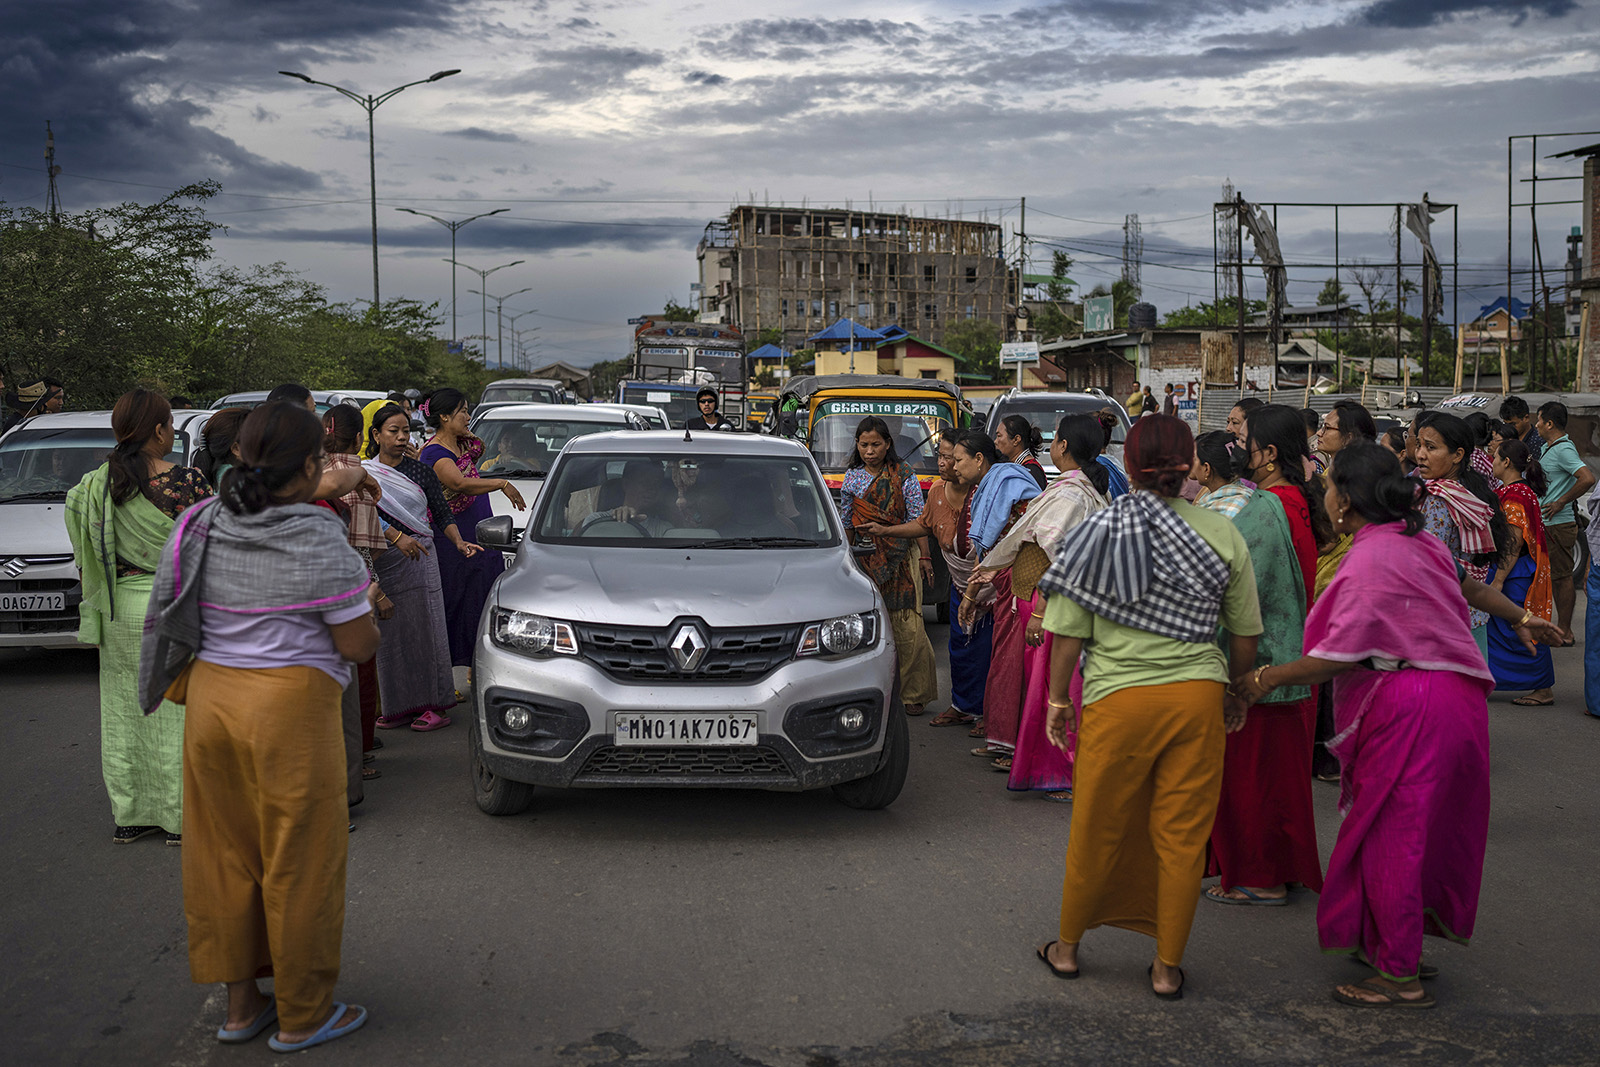 FILE- Members of Meira Paibis, a powerful vigilante group of Hindu majority Meitei women, block traffic as they check vehicles for the presence of members from the rival Christian tribal Kuki community, in Imphal, capital of the northeastern Indian state of Manipur, June 19, 2023. For three months, Indian Prime Minister Narendra Modi has been largely silent on ethnic violence that has killed over 150 people in Manipur. That's sparked a no-confidence motion against his government in Parliament, where his party and allies hold a clear majority. (AP Photo/Altaf Qadri, File)